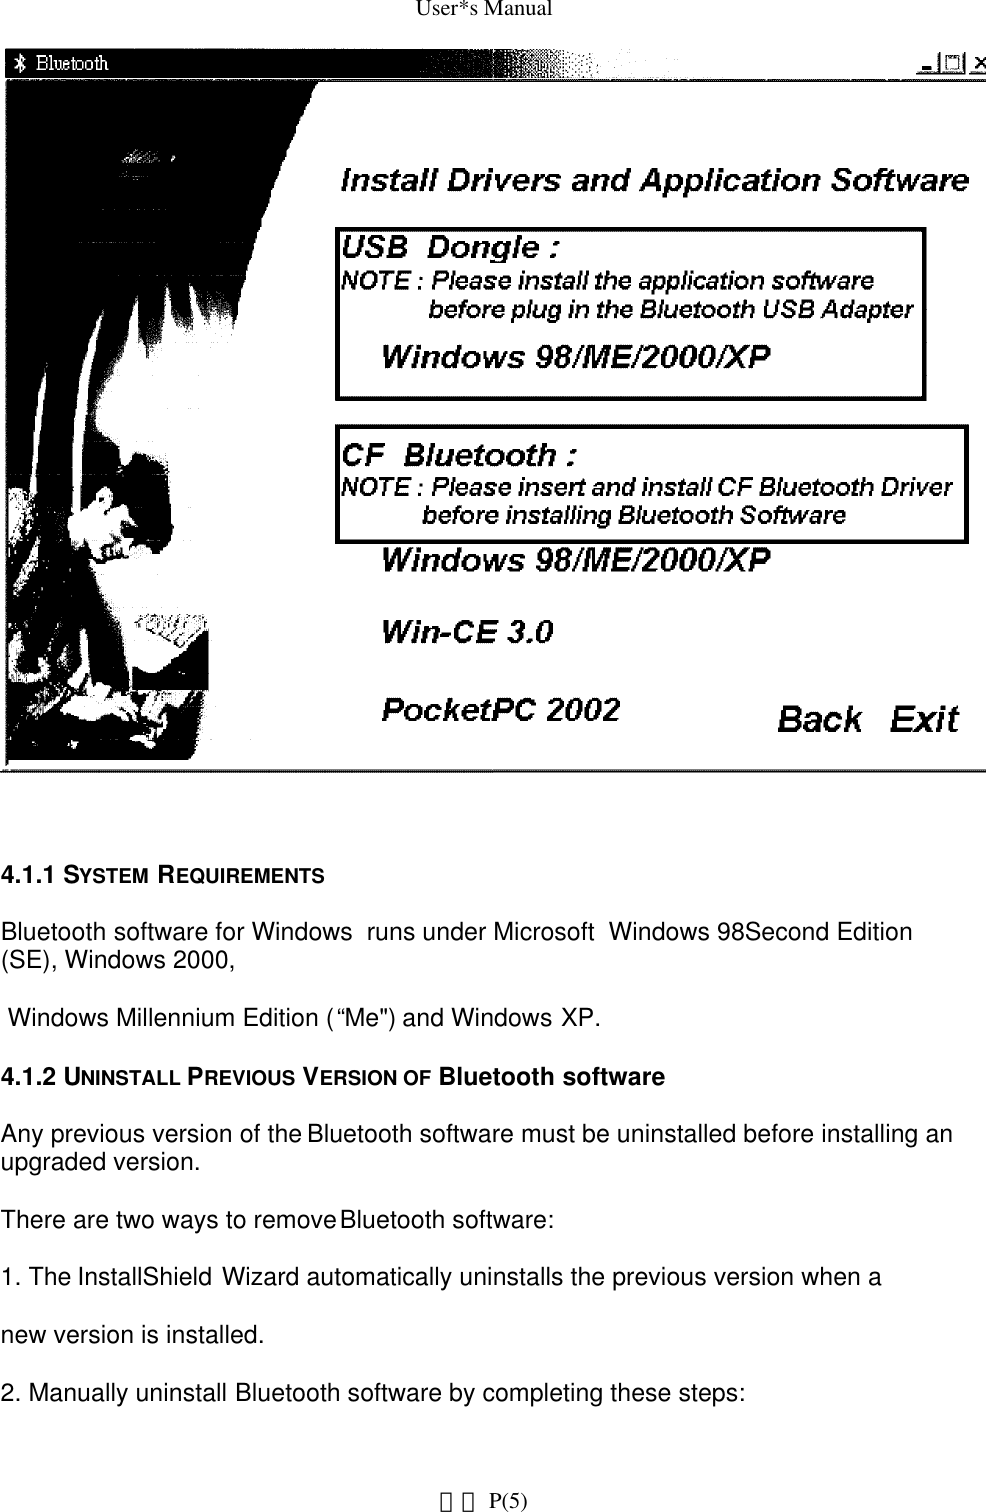 User*s Manual4.1.1 SYSTEM REQUIREMENTSBluetooth software for Windows  runs under Microsoft  Windows 98 Second Edition (SE), Windows 2000, Windows Millennium Edition (“Me&quot;) and Windows XP.4.1.2 UNINSTALL PREVIOUS VERSION OF Bluetooth softwareAny previous version of the Bluetooth software must be uninstalled before installing an upgraded version.There are two ways to remove Bluetooth software:1. The InstallShield Wizard automatically uninstalls the previous version when anew version is installed.2. Manually uninstall Bluetooth software by completing these steps: P(5)網頁